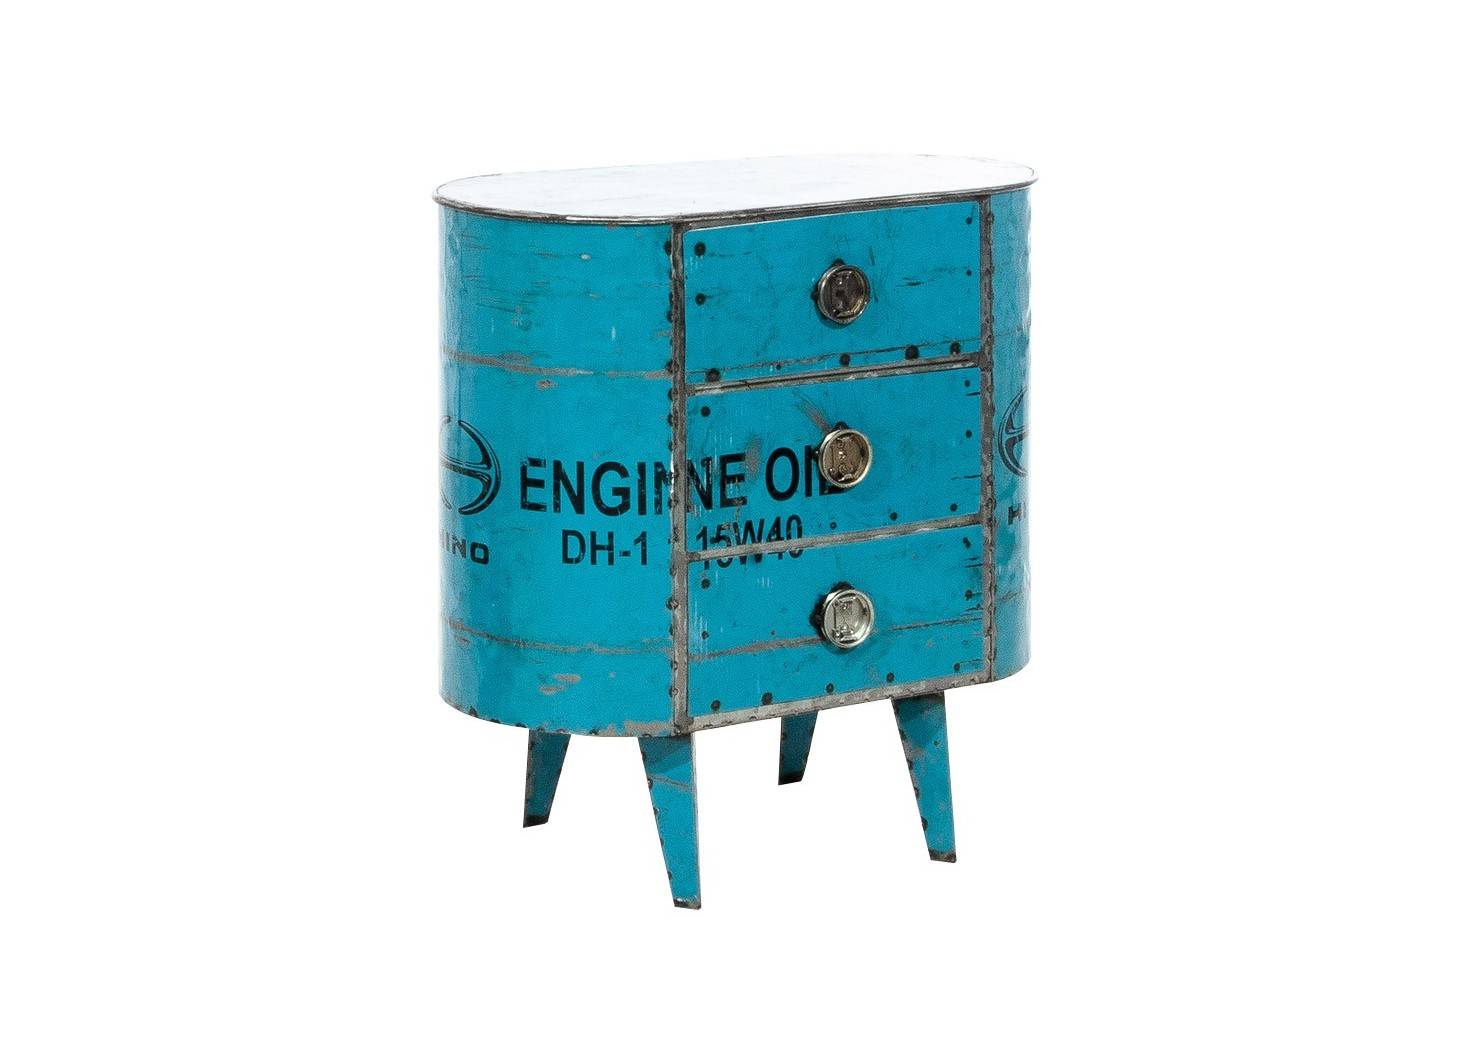 End table made ouf of oil can - arts & crafts